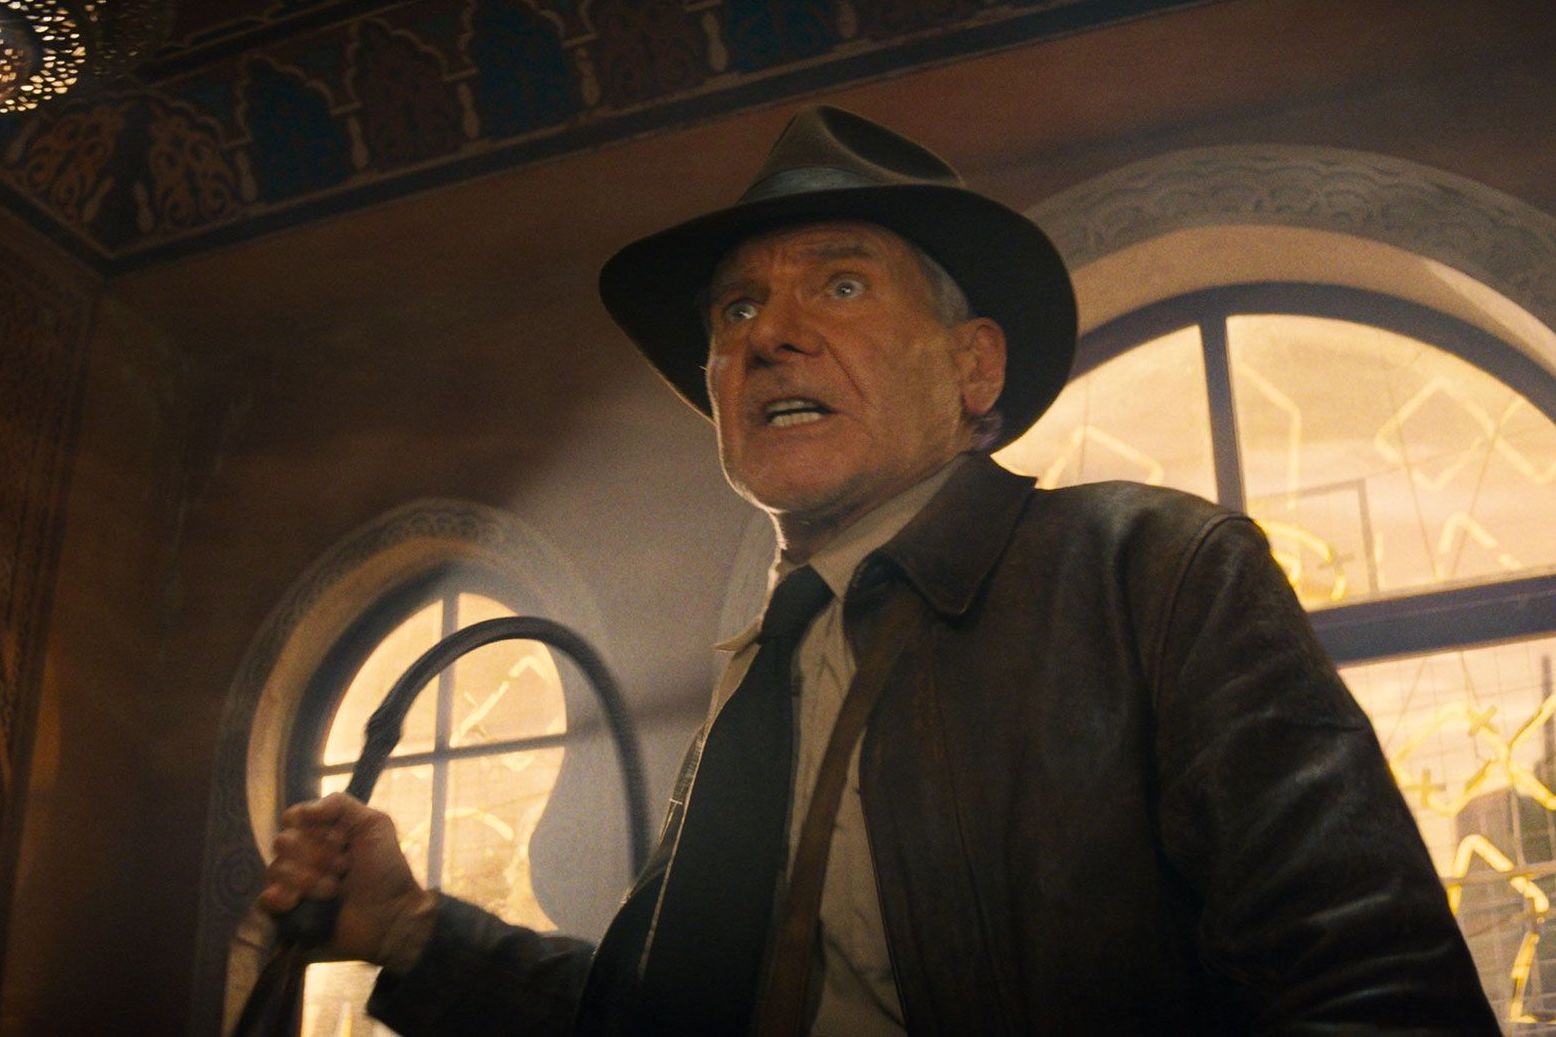 Harrison Ford as Indiana Jones in Indiana Jones and the Dial of Destiny, holding a whip and looking angry